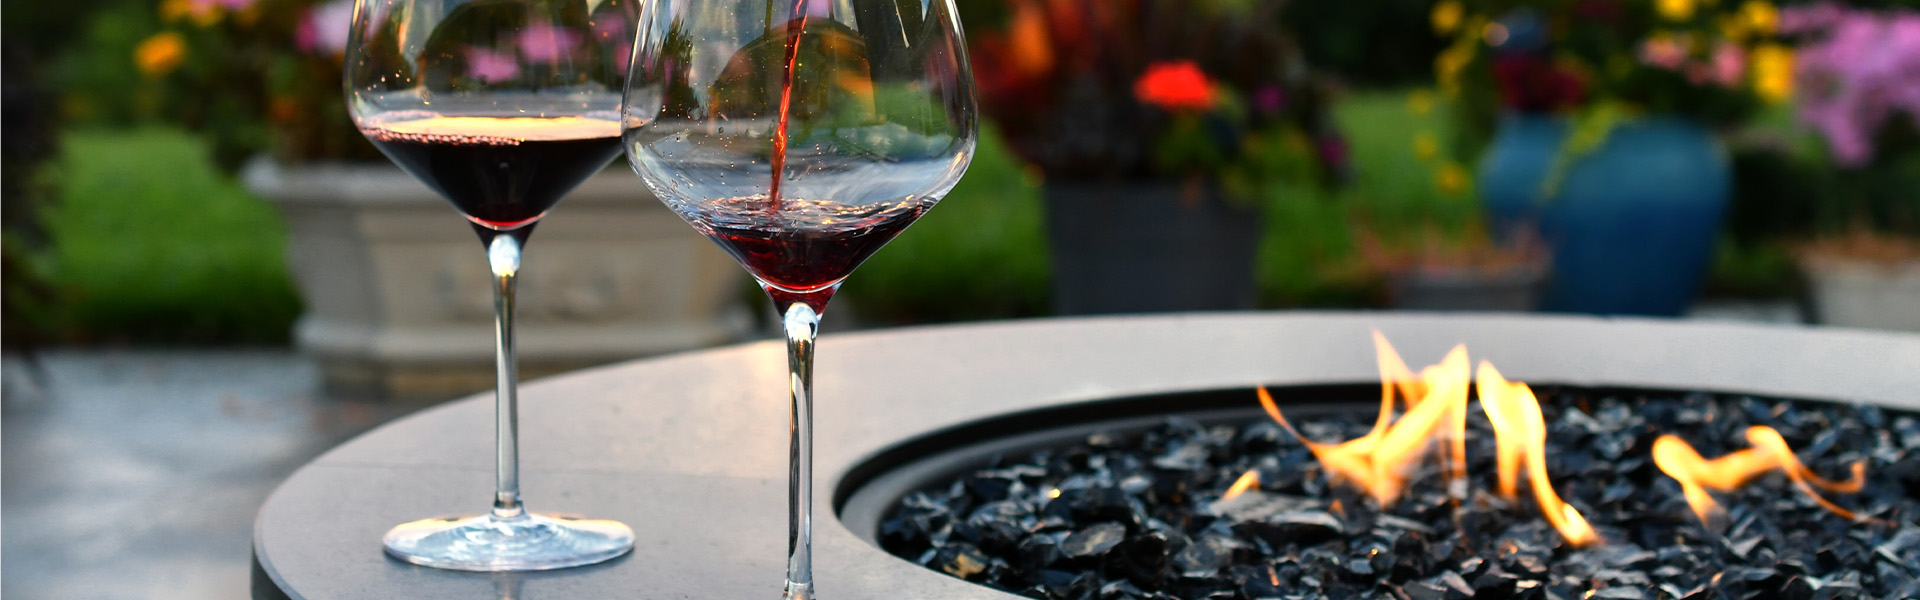 Outdoor firepit with wine glasses on the rim